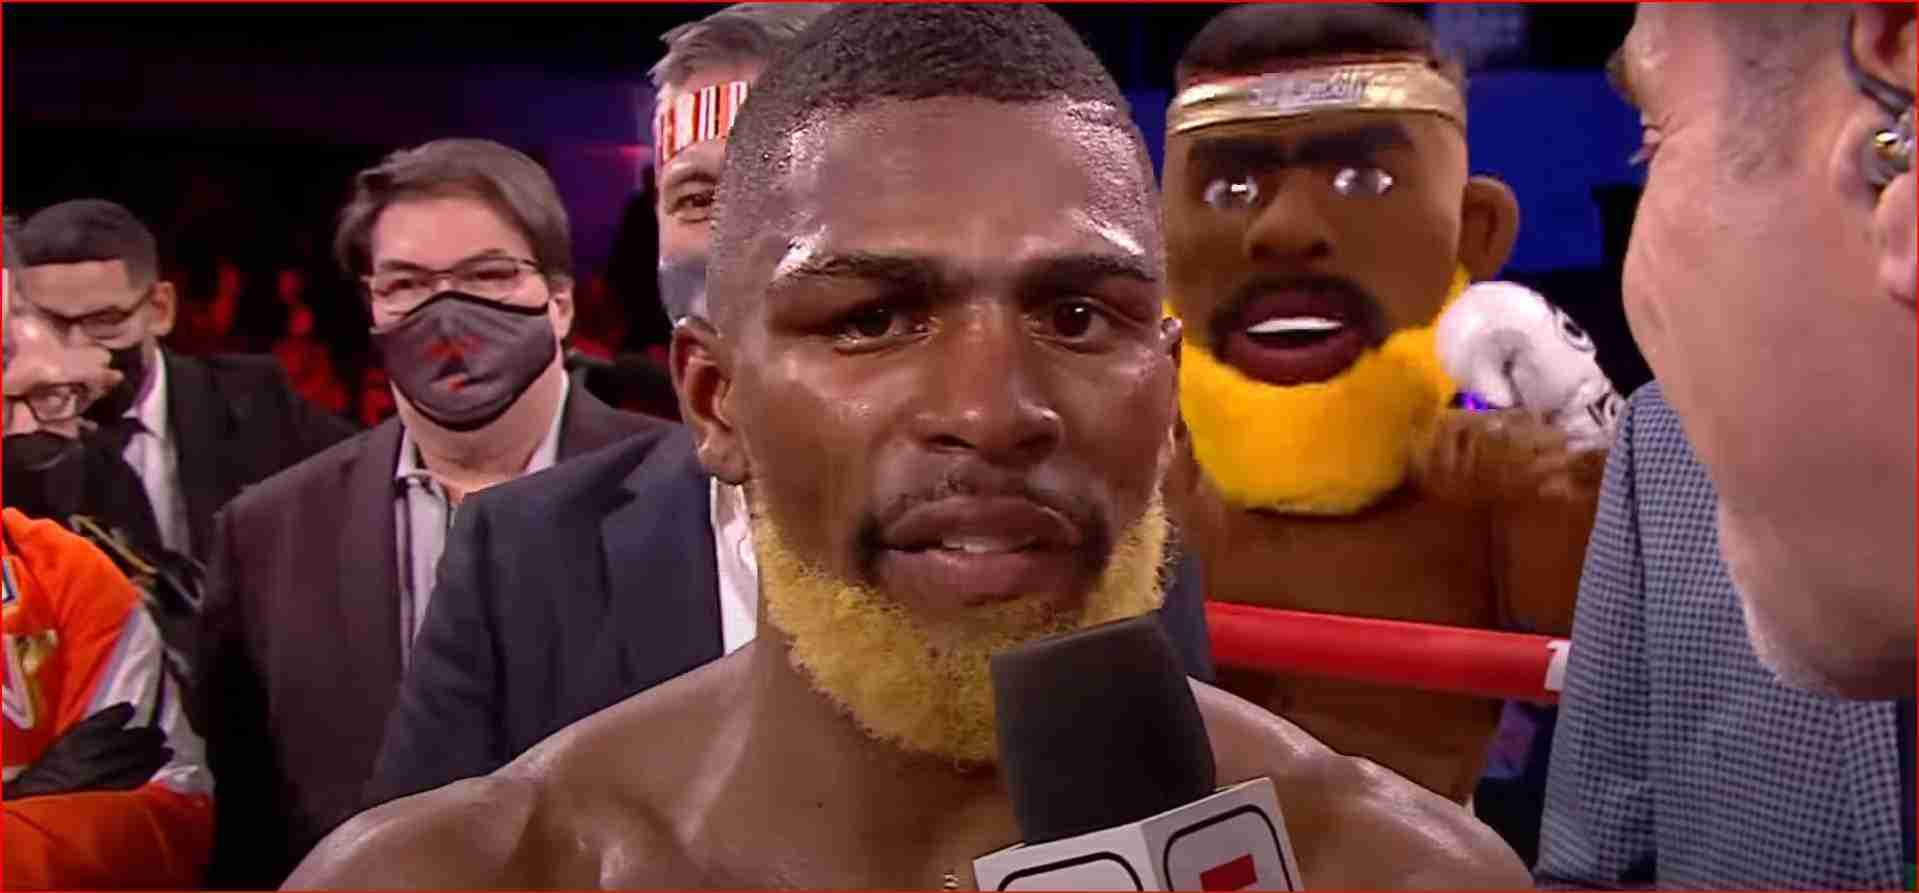 Boxer Batters Adversary But His Mascot Steals The Show